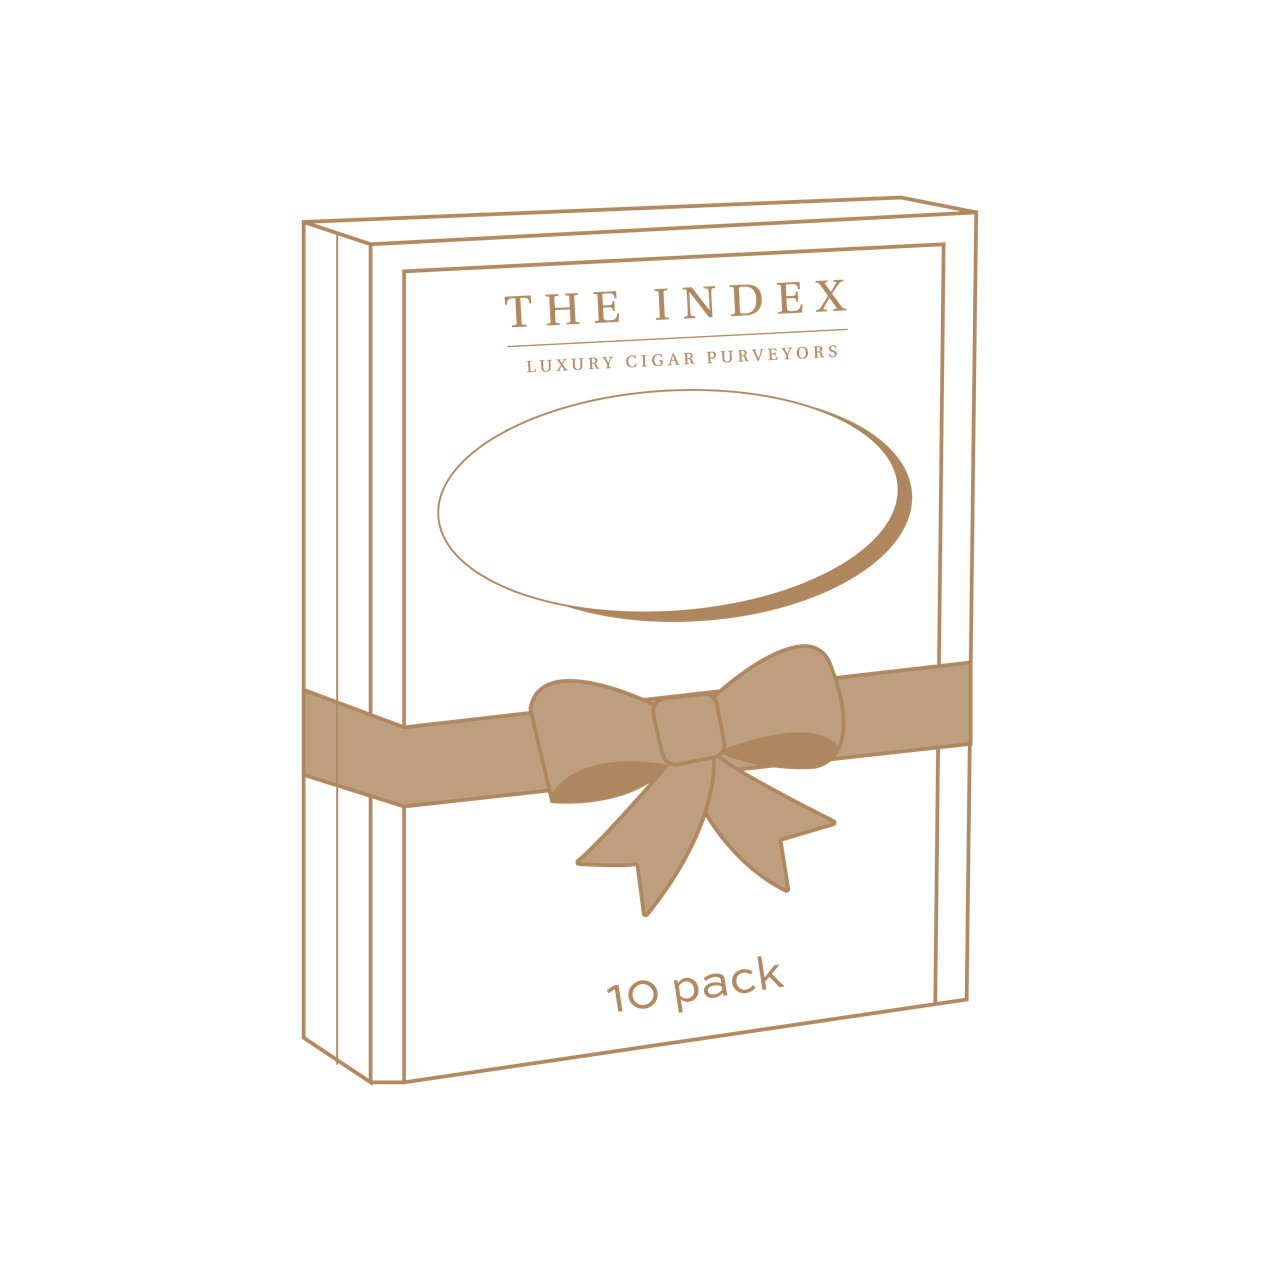 The Index Mystery Box of 10 Cigars